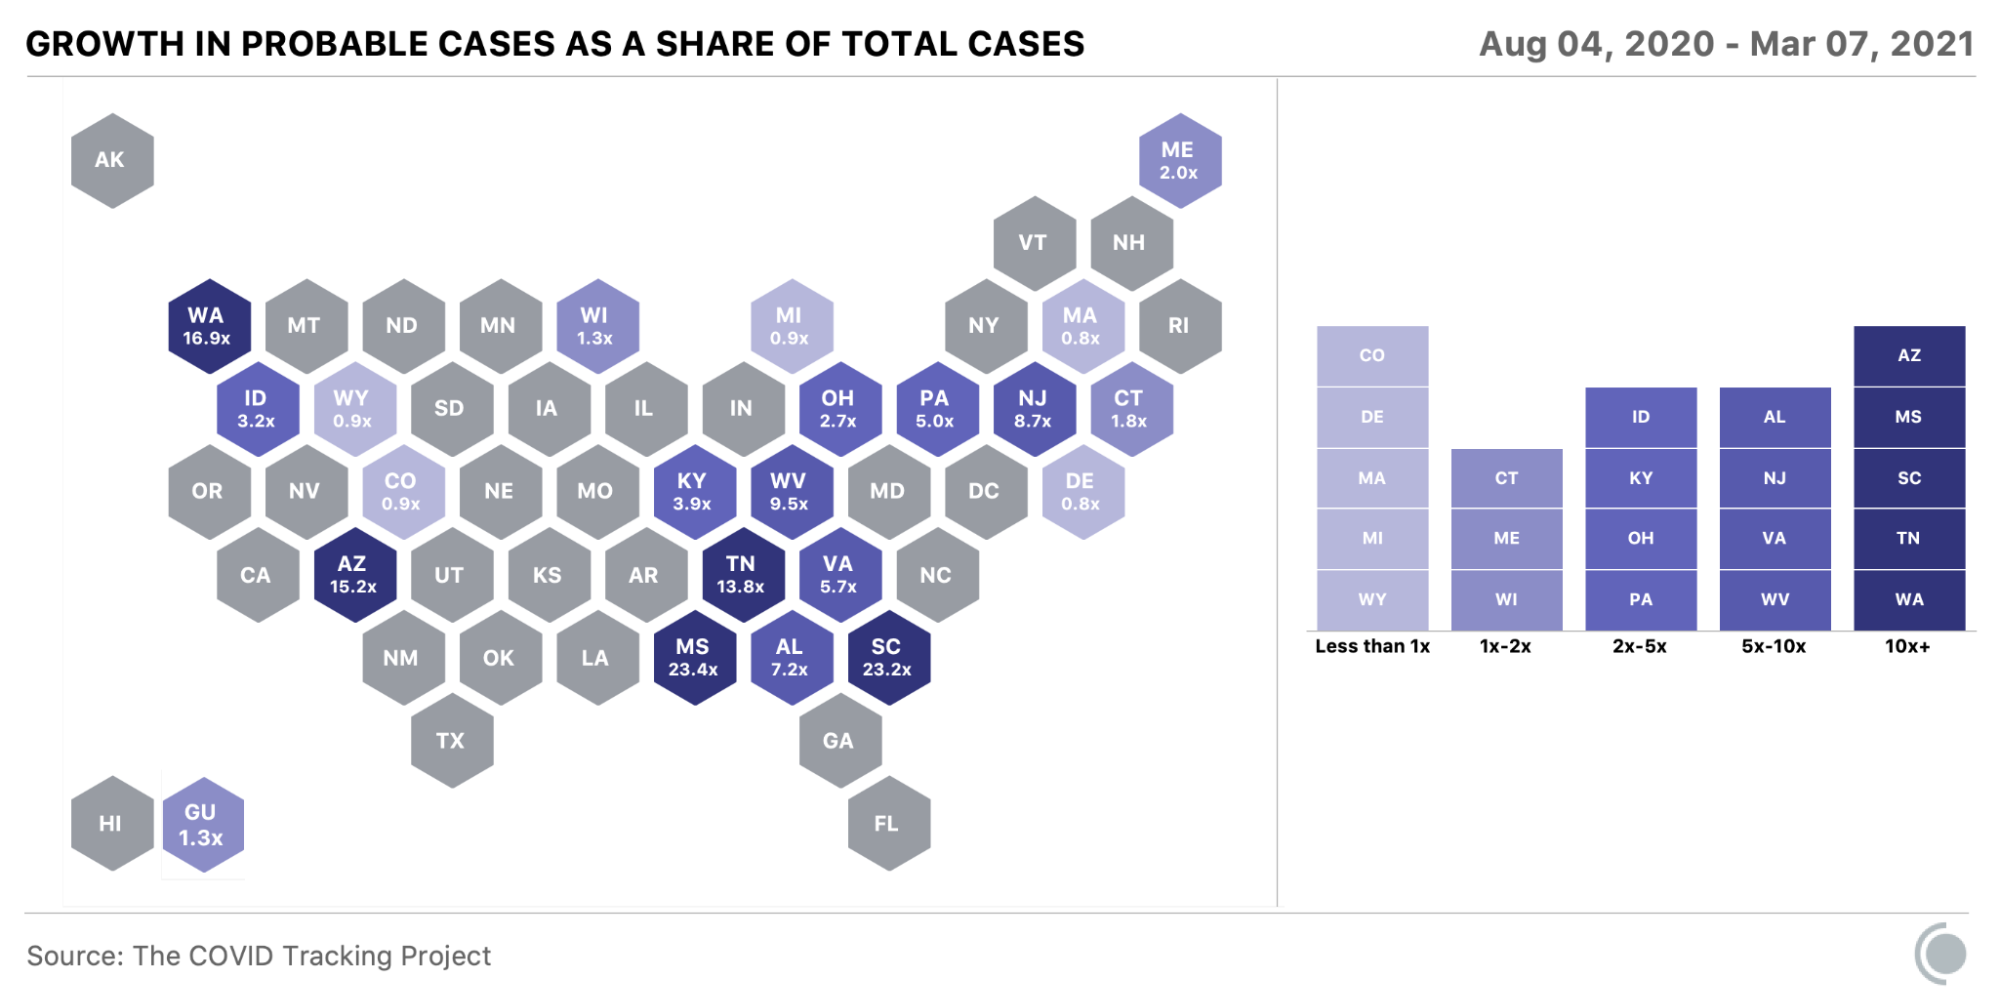 A map of US states shows the growth of probable cases as a share of total cases between August 4, 2020 and March 7, 2021. In five states—Colorado, Delaware, Massachusetts, Michigan and Wyoming—probable cases as a share of total cases slightly decreased. Three states—Connecticut, Maine, and Wisconsin—saw probable cases increase by 1-2x. In four states—Idaho, Kentucky, Ohio and Pennsylvania—probable cases' share increased by between 2-5x. In Alabama, New Jersey, Virginia, and West Virginia, the share increased by 5-10x. And in five states—Arizona, Mississippi, South Carolina, Tennessee, and Washington—the share of probable cases increased by greater than 10.